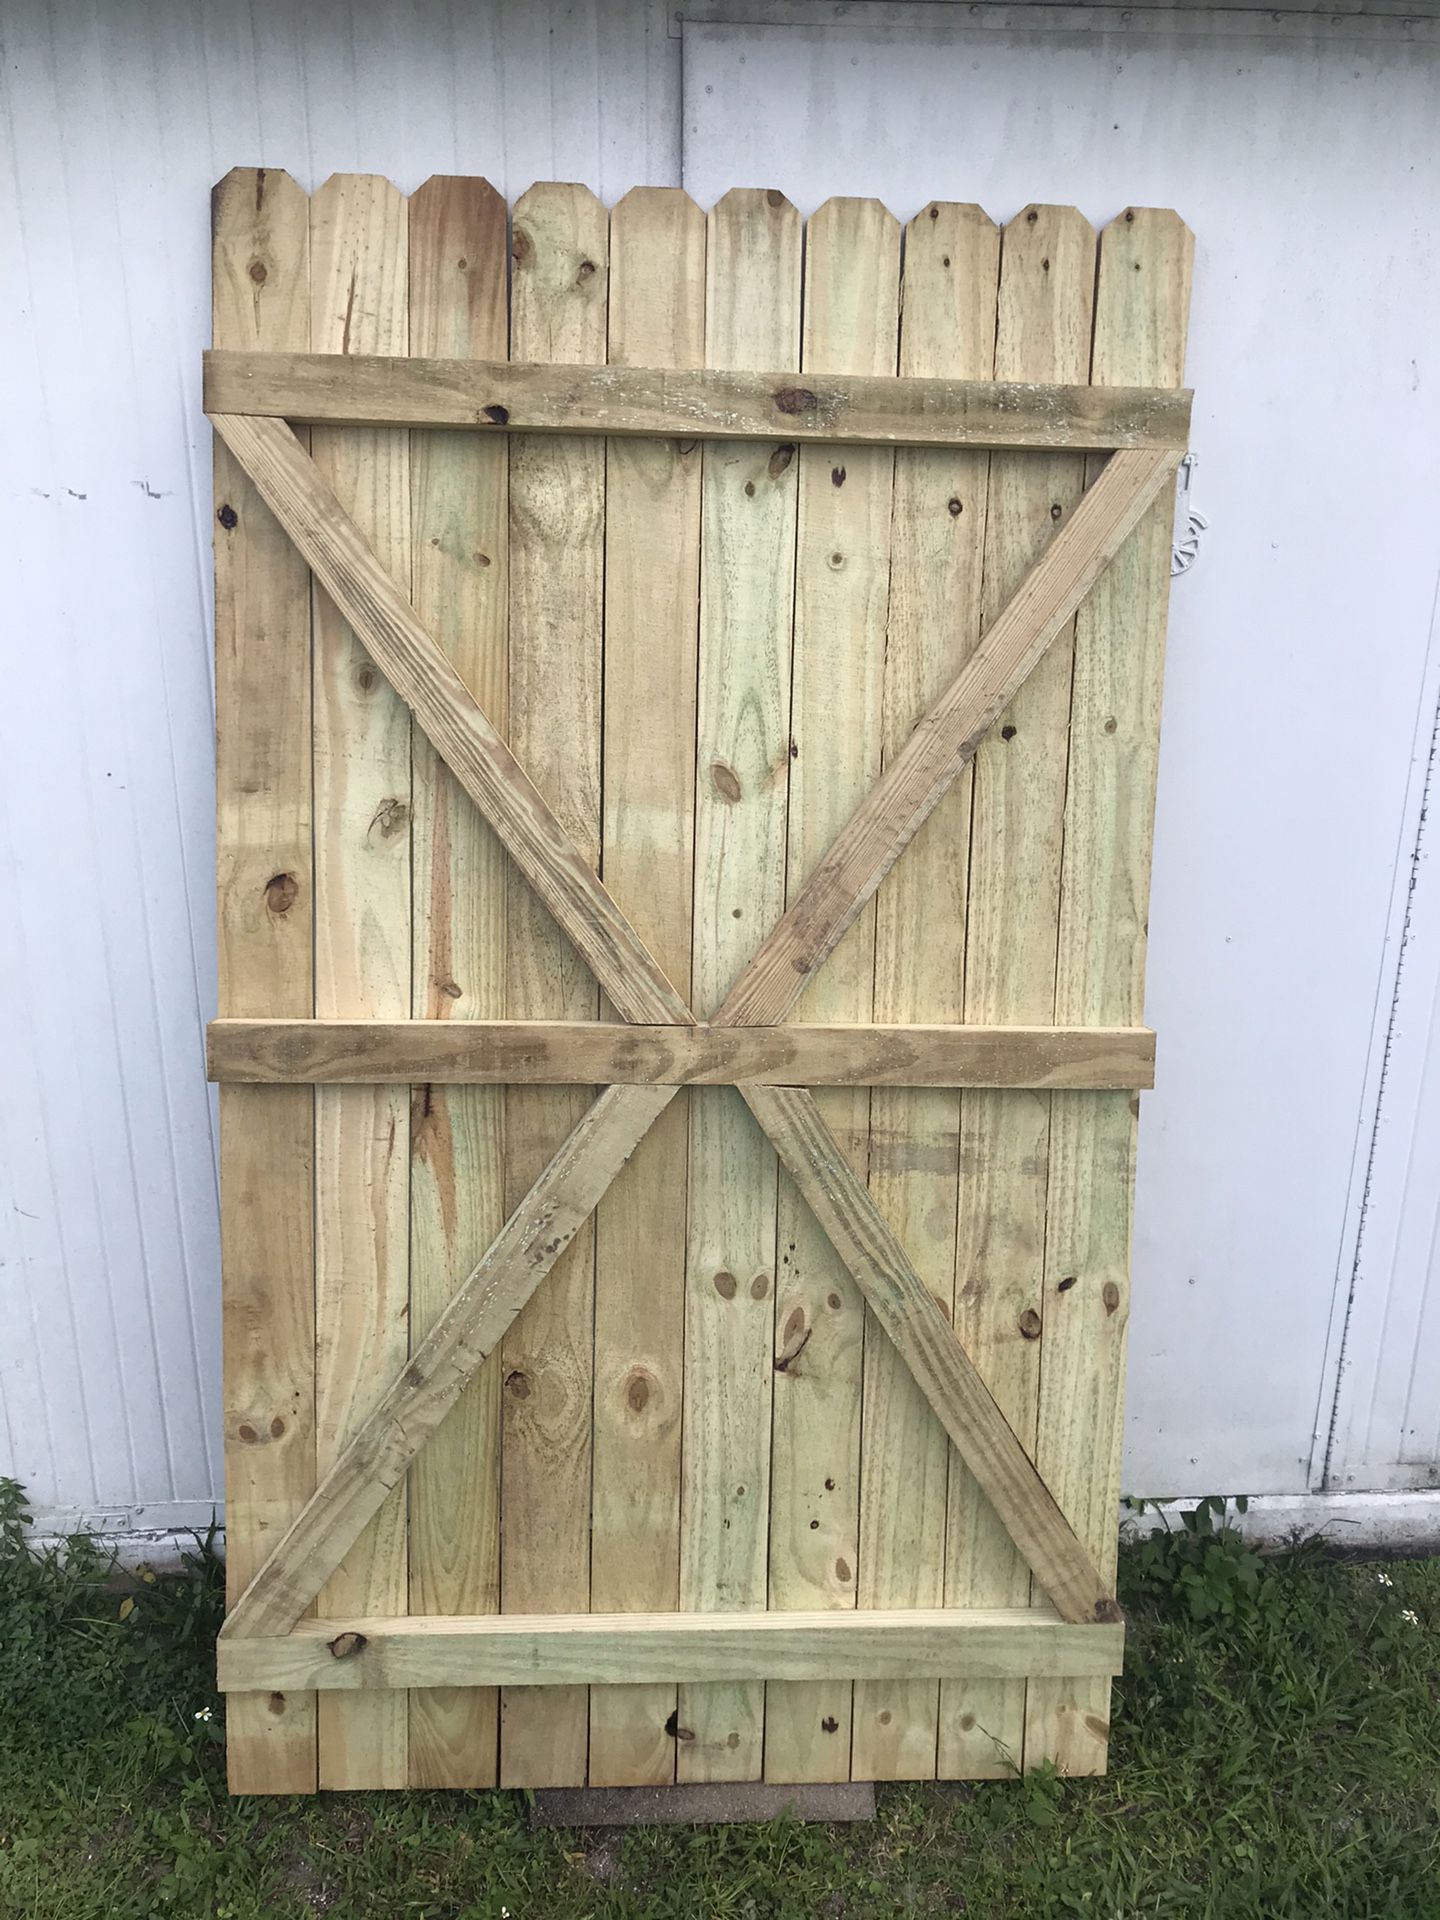 NEW, WOOD FENCE ( GATE 46”W. X 6’H. ) ((( NO hardware ))). PRICE IS FIRM, NO OFFERS, NO DELIVERY . ( THE FIRST TO COME IS THE FIRST TO BE SERVED )